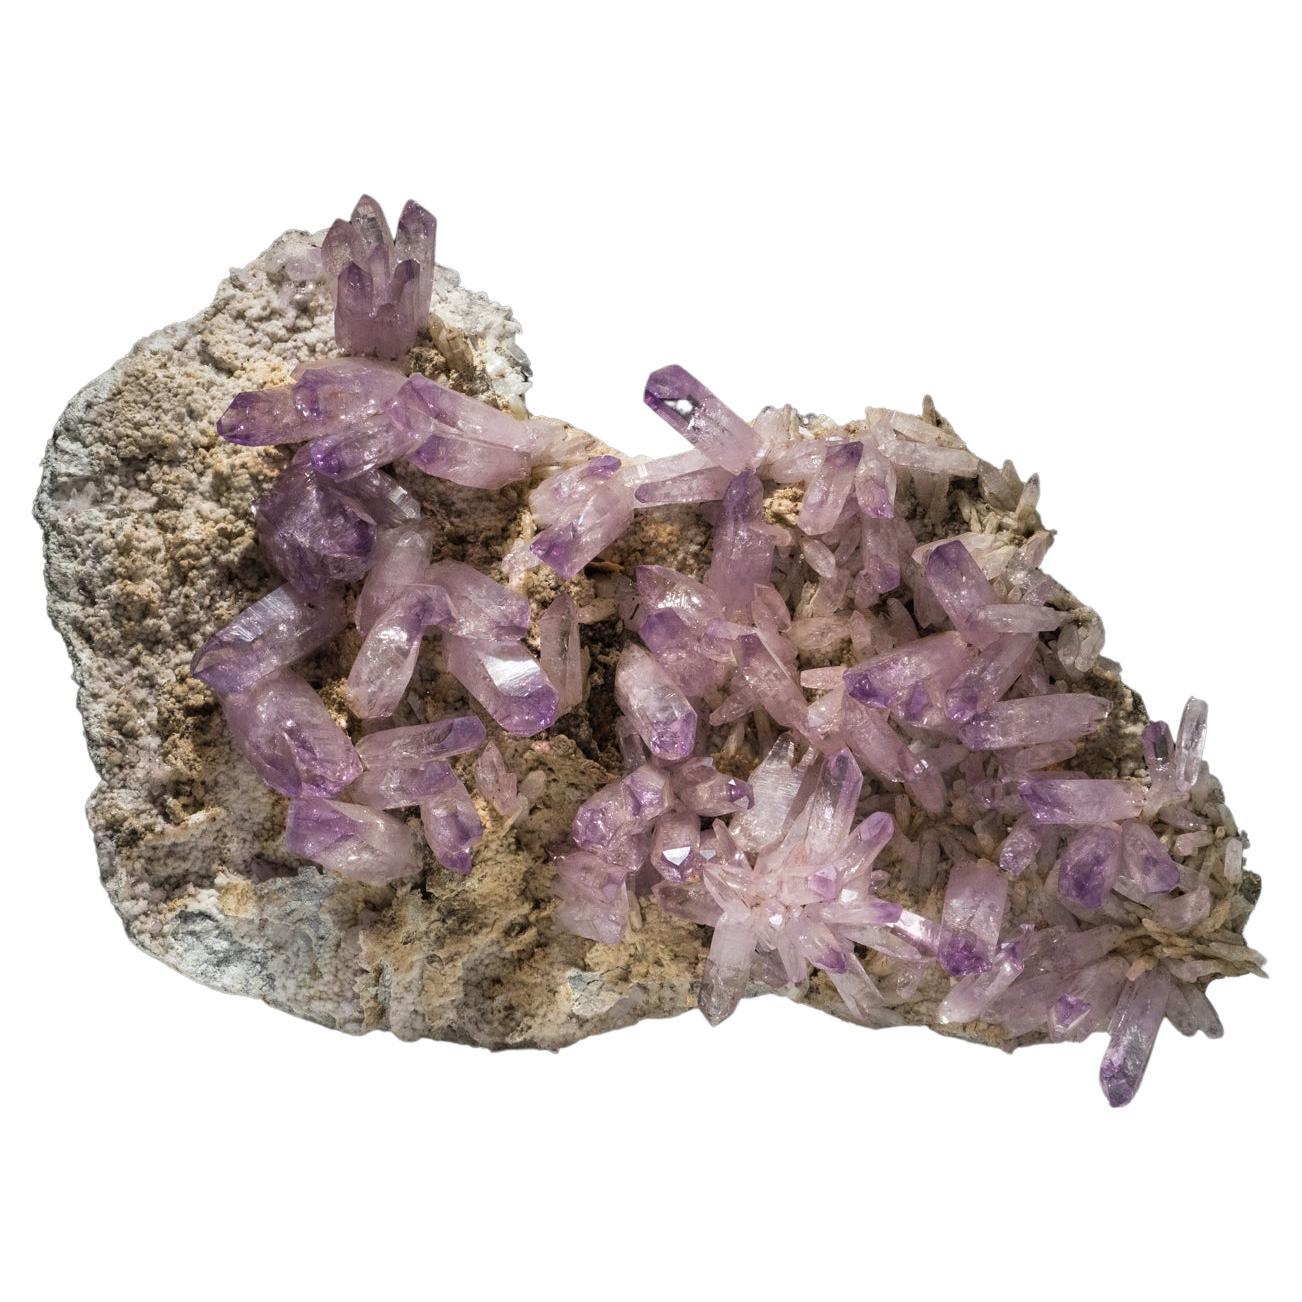 Amethyst Crystals Mineral on a Parallel Formation from Veracruz, Mexico